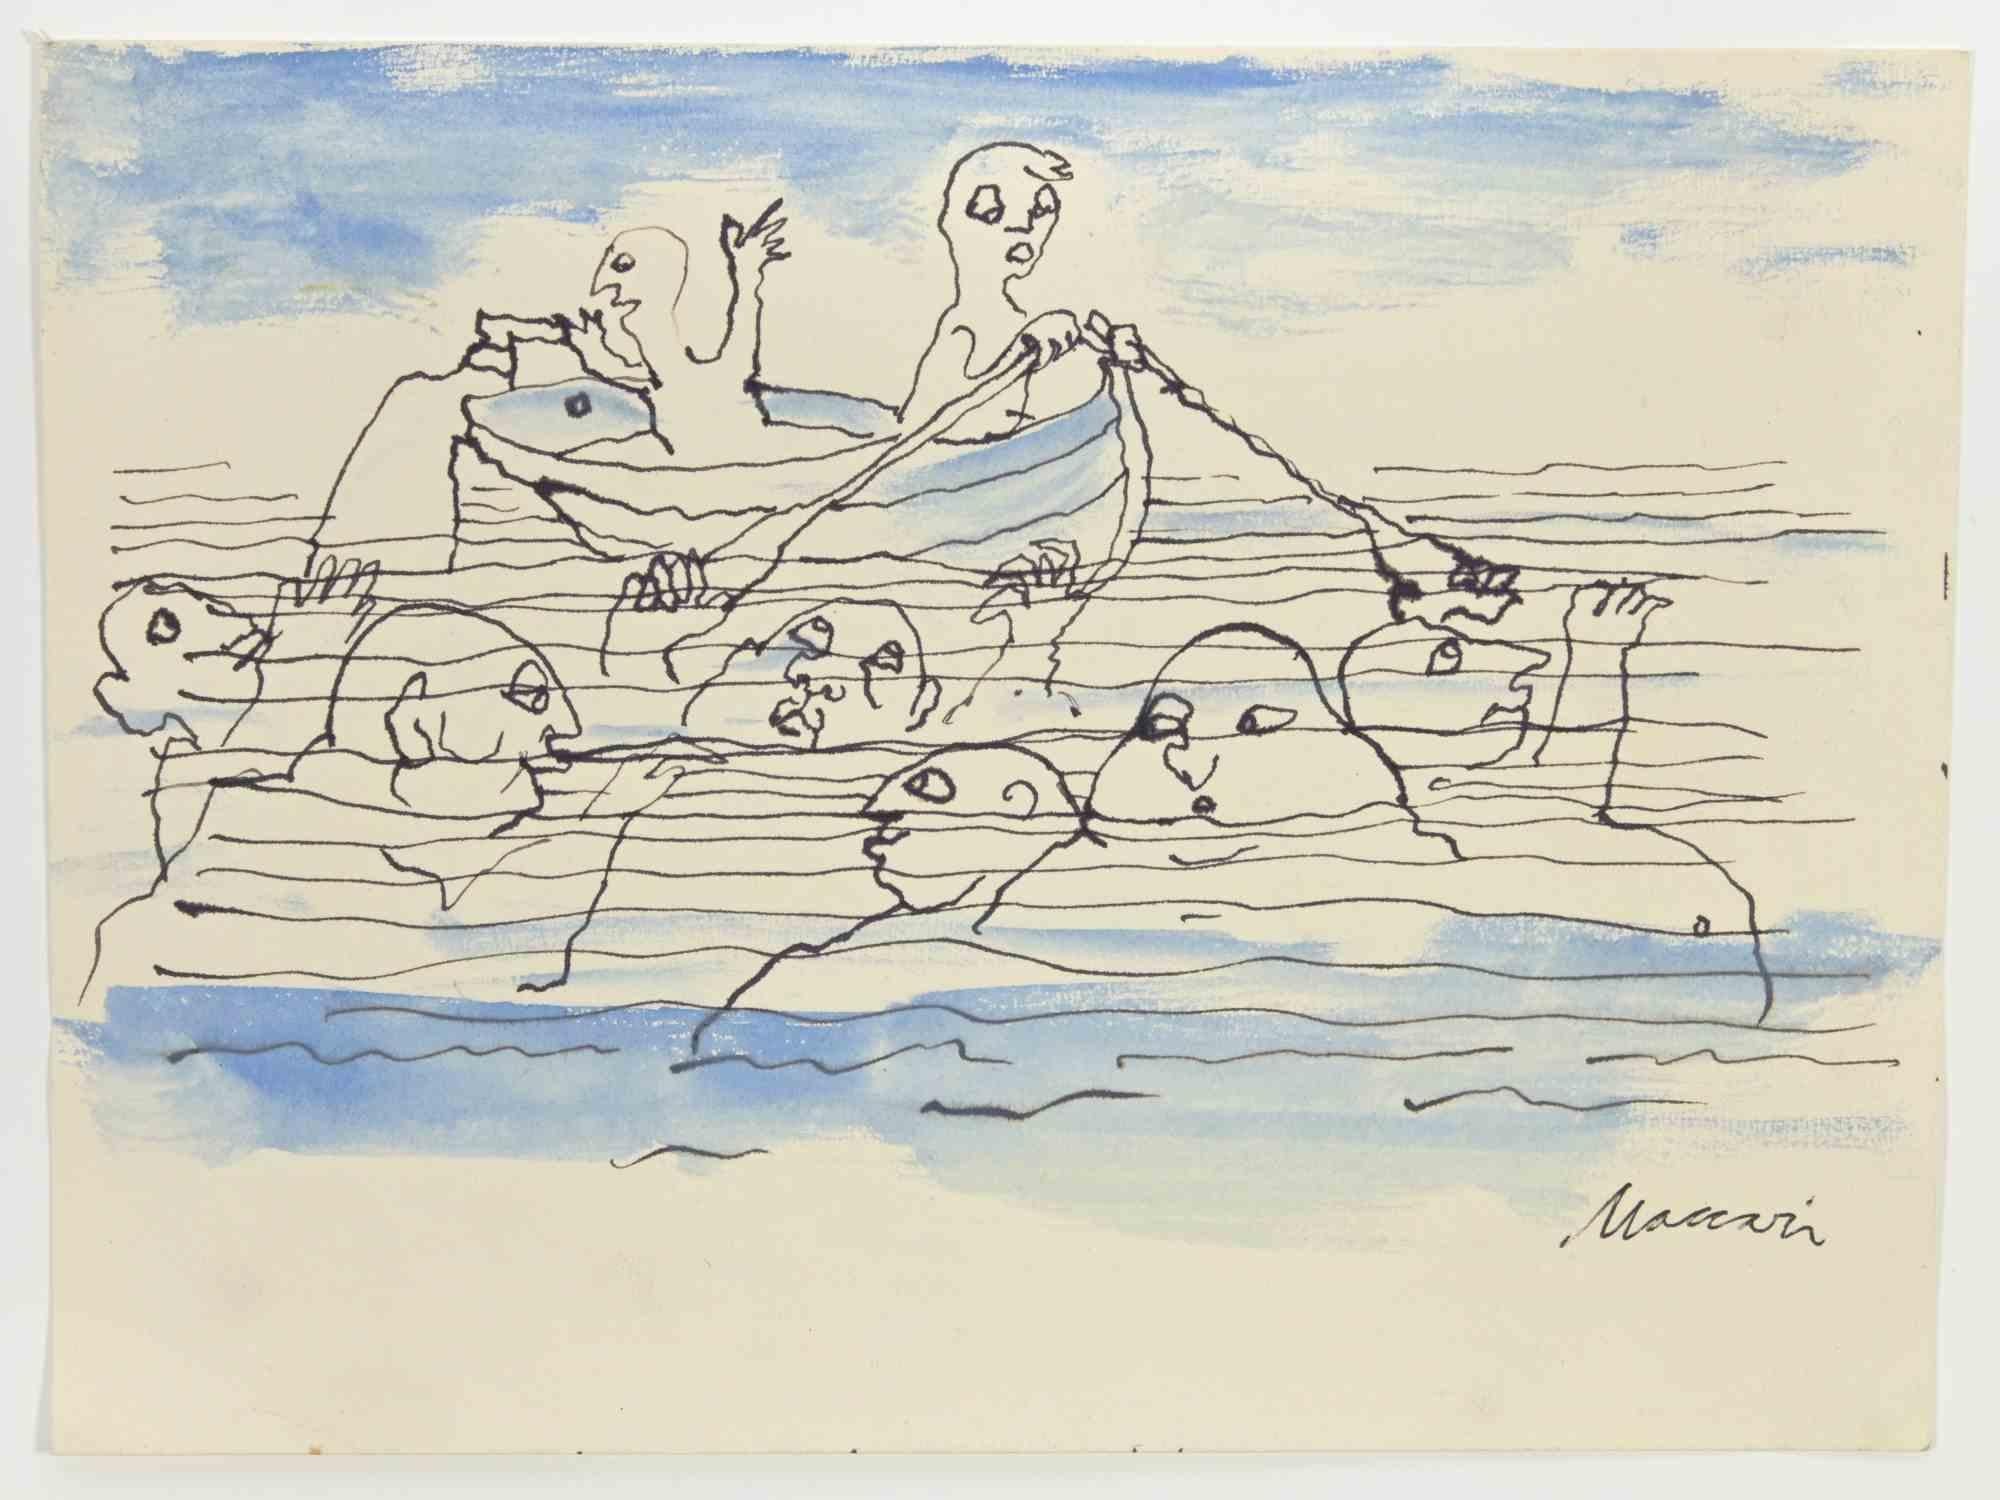 Shipwrecks is a china ink and watercolor Drawing realized by Mino Maccari  (1924-1989) in the 1960s.

Hand-signed on the lower.

Good conditions.

Mino Maccari (Siena, 1924-Rome, June 16, 1989) was an Italian writer, painter, engraver and